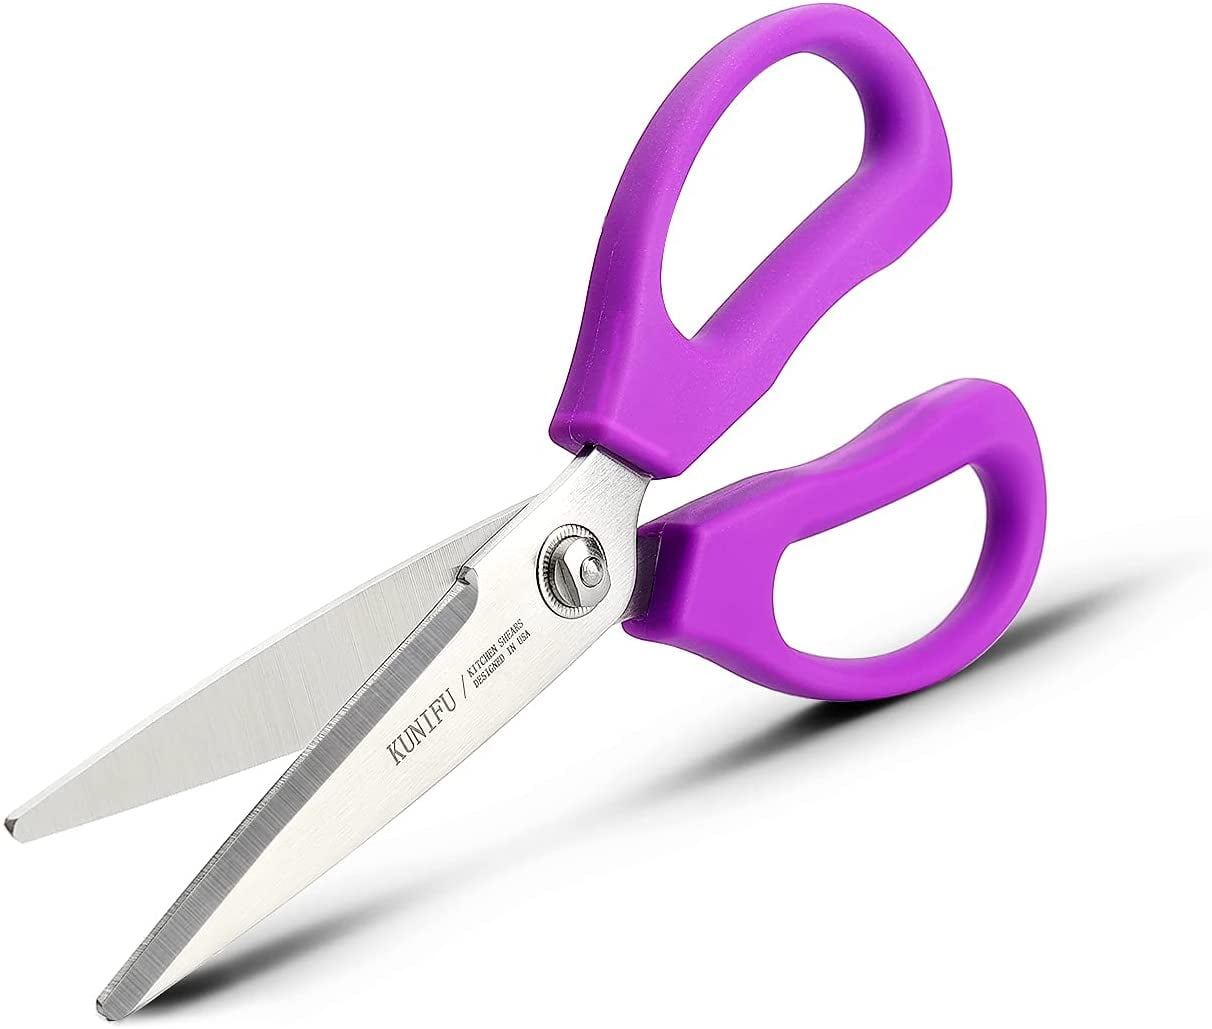 Scissors, UNICOMA All Purpose Scissors Set, Include 2pcs 8' Comfort-Grip  Sturdy Scissors for Office Home General Use, and 8' Kitchen Scissor for  Food